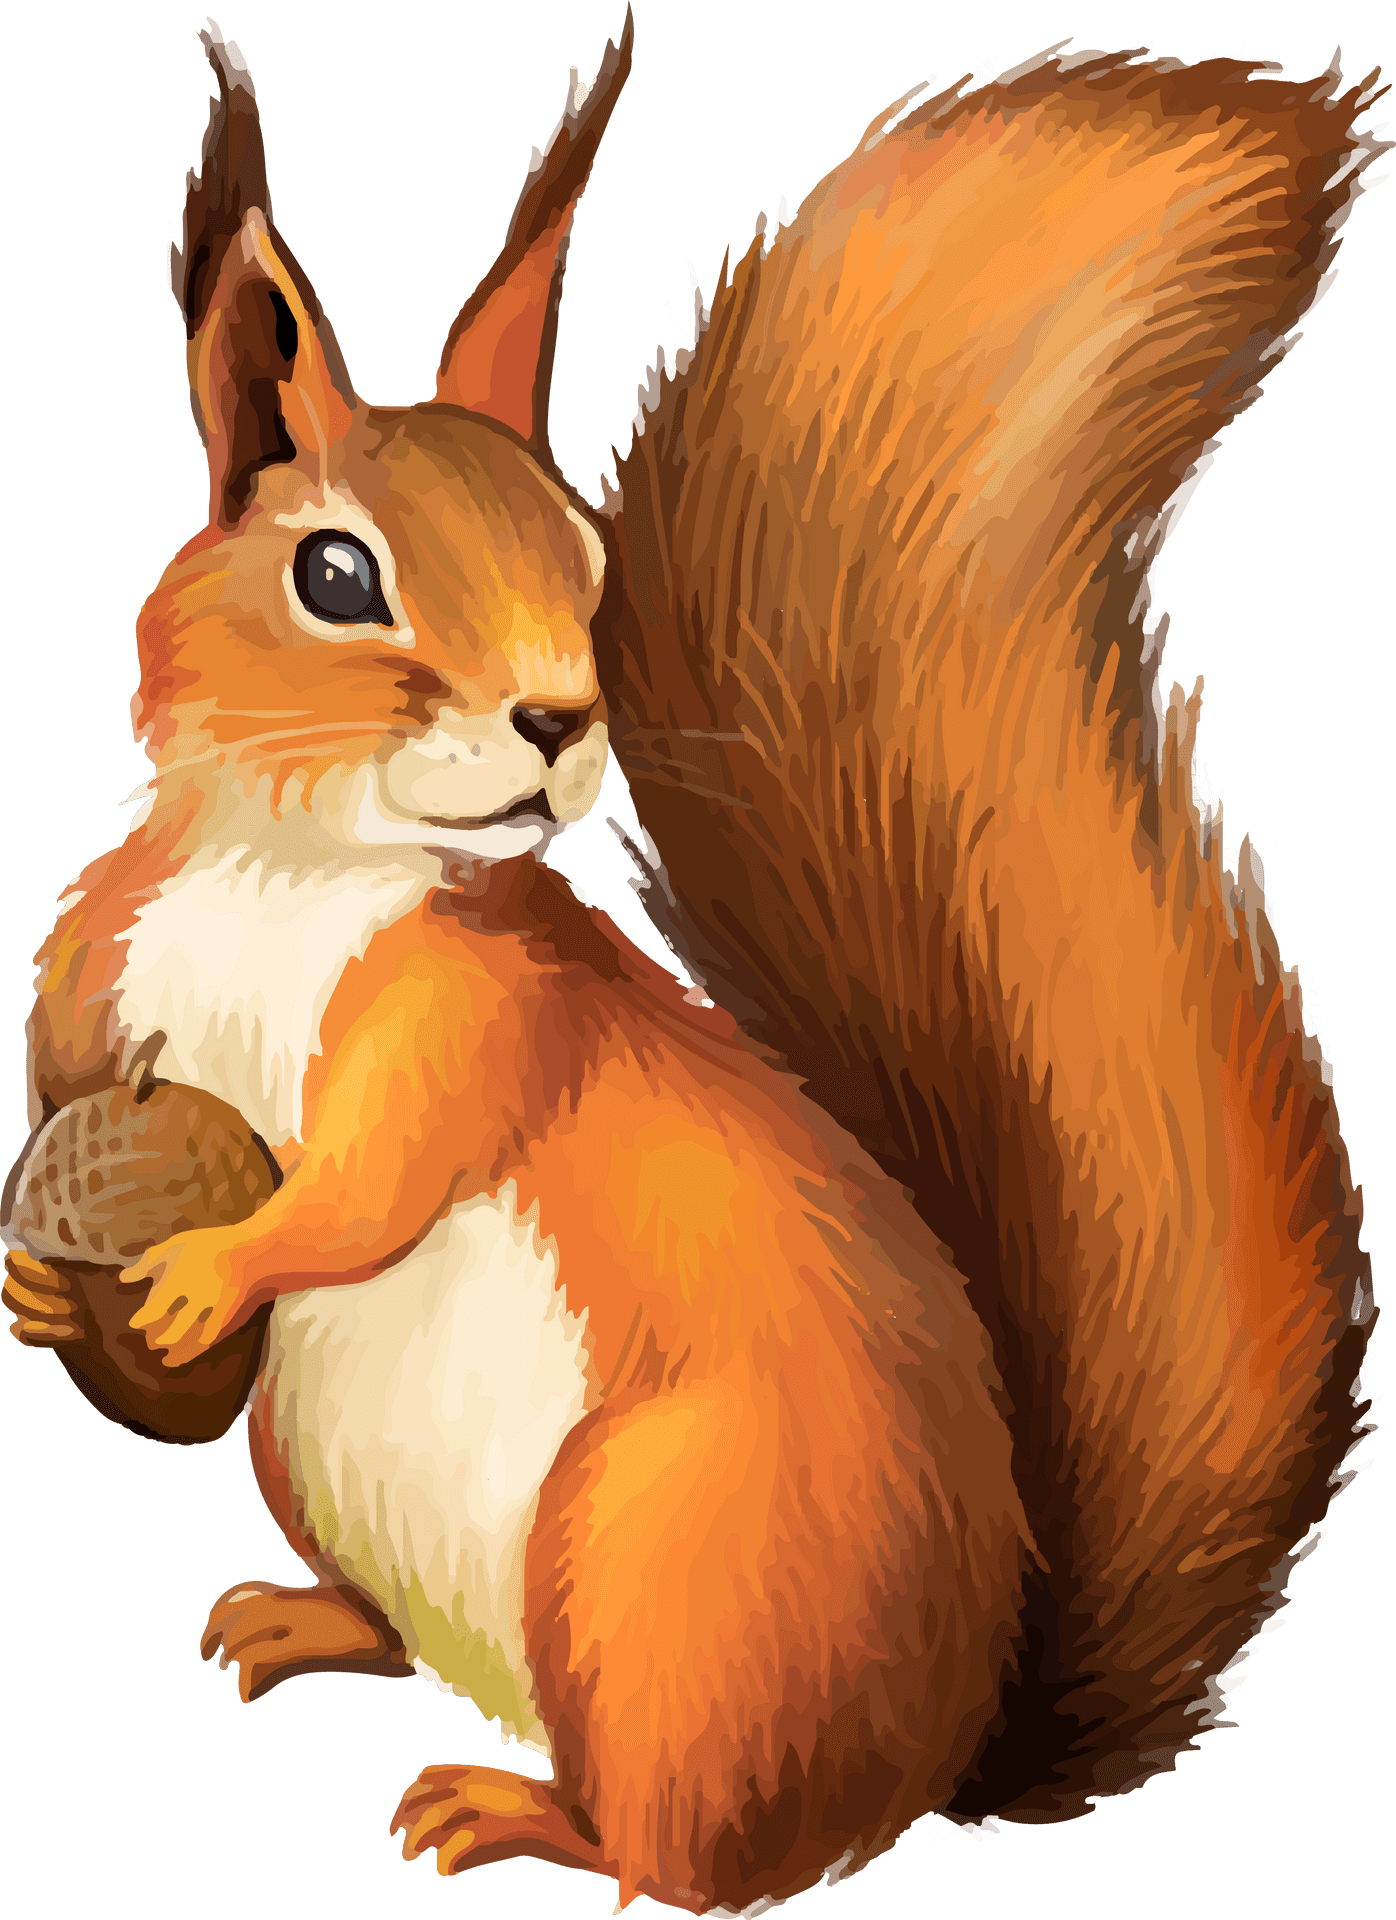 Red Squirrel Holding Nut Illustration PNG